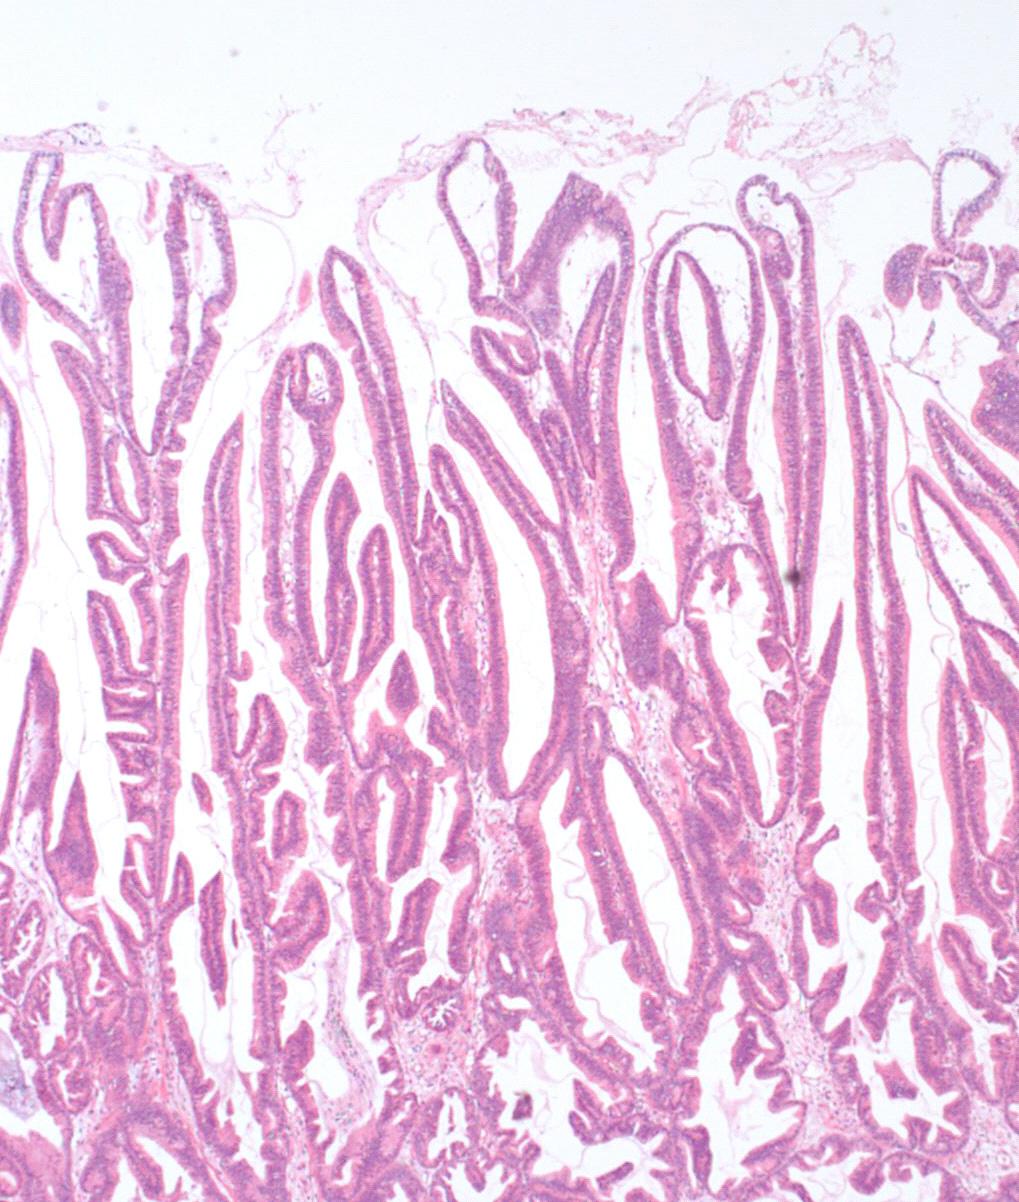 Long finger-like projections stretching with minimal branching covered by columnar epithelia (H&E stain, 40).